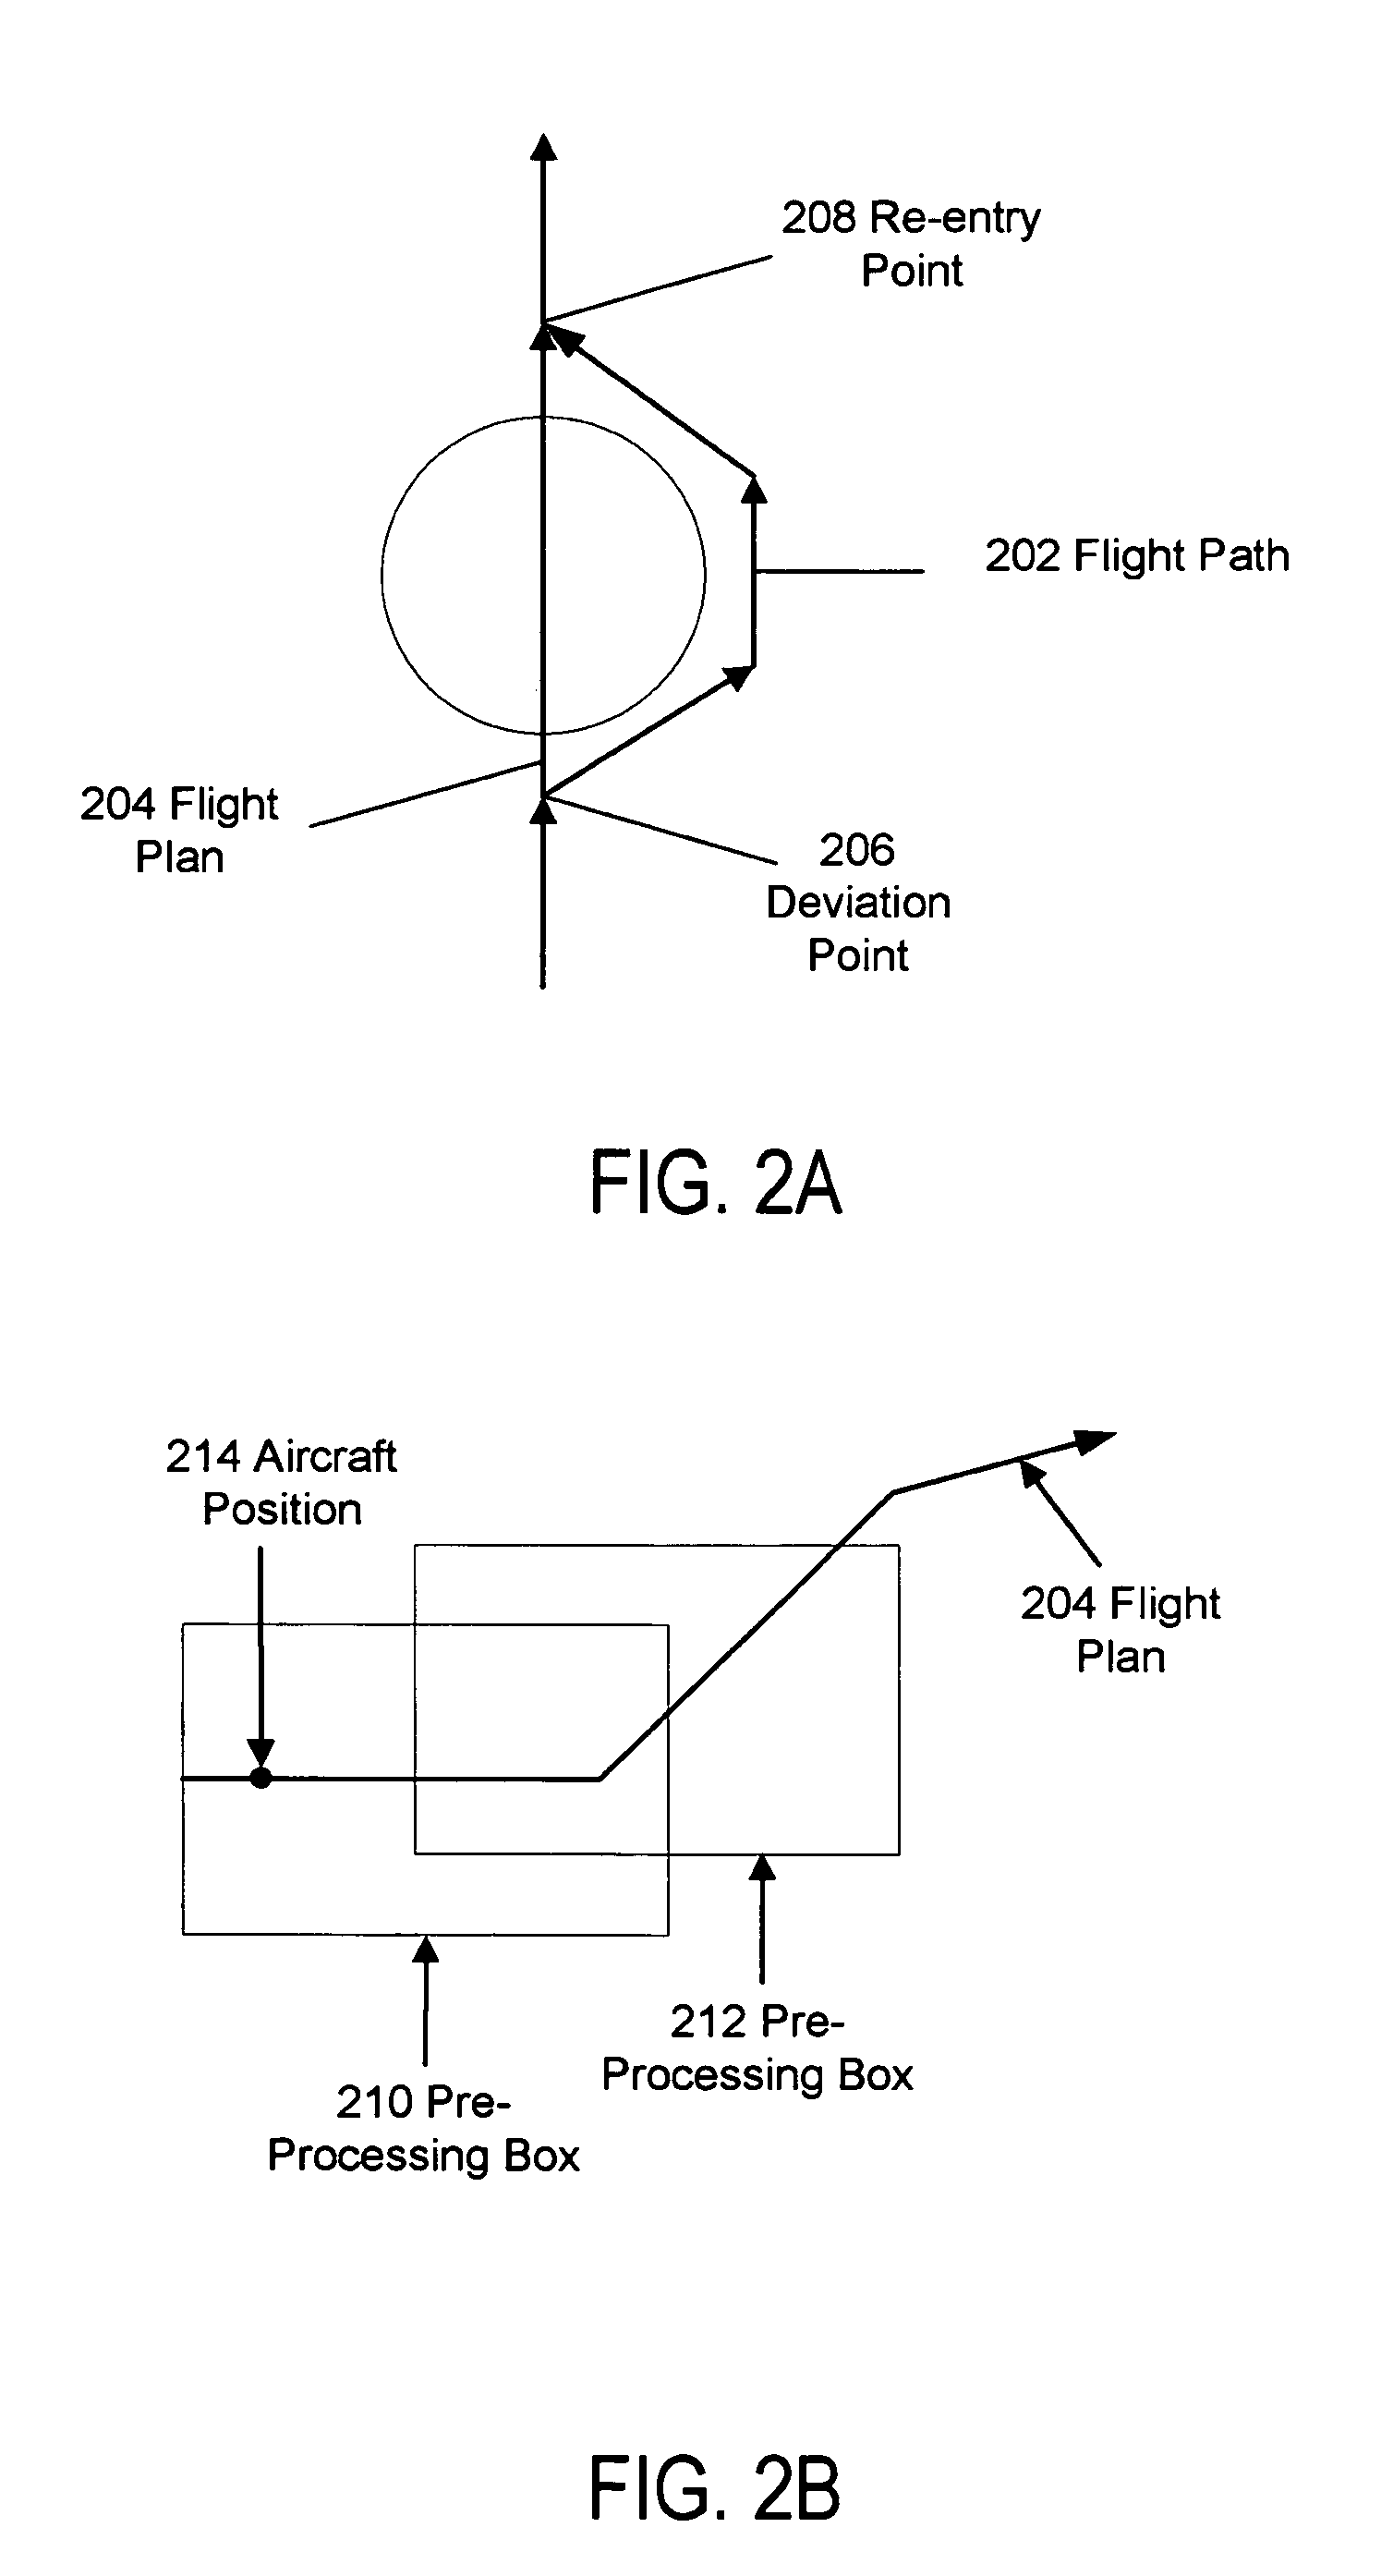 System, module, and method of constructing a flight path used by an avionics system